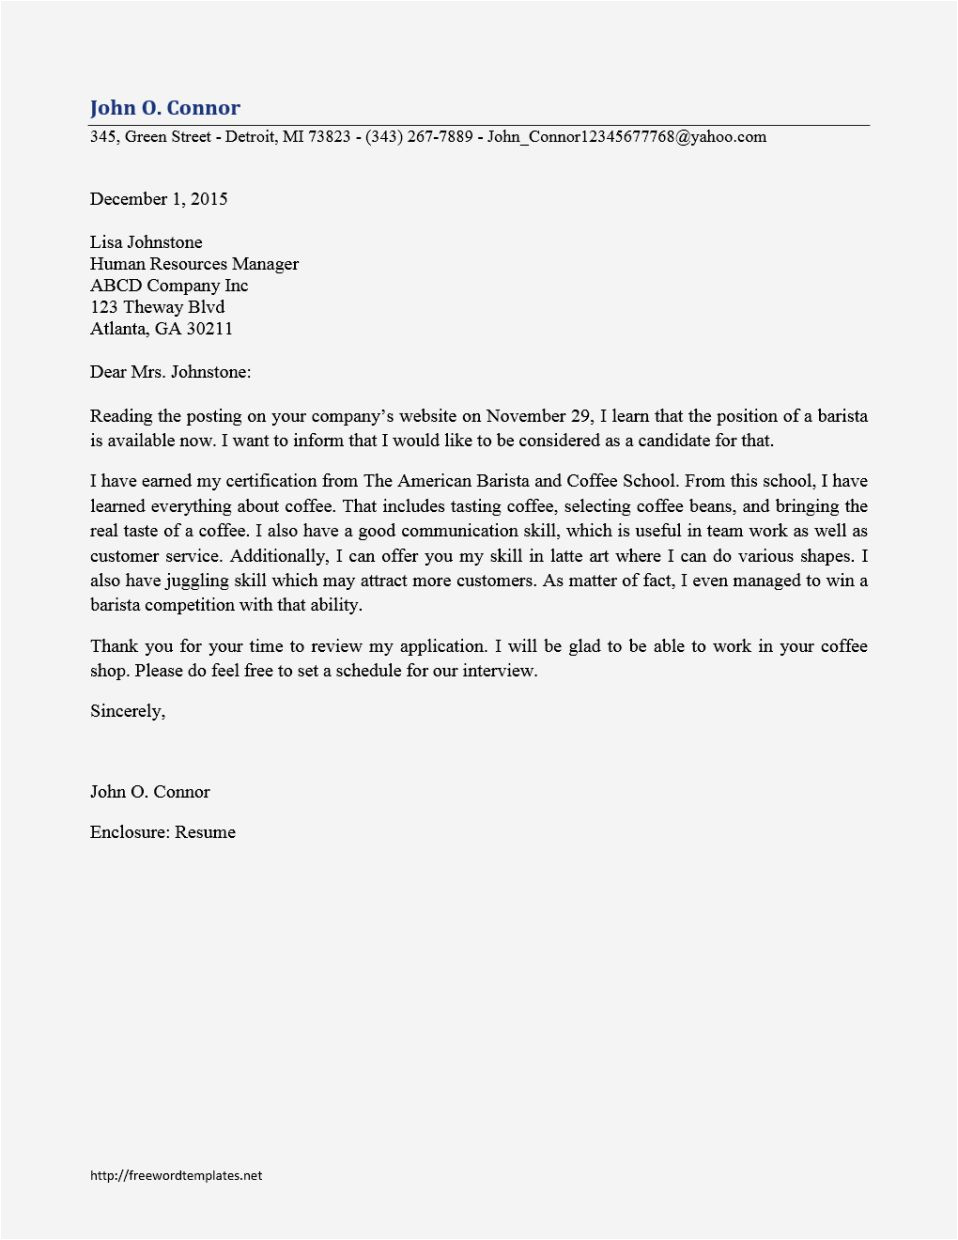 Cover Letter with No Name Of Recipient Cover Letter No Template Resume Template Cover Letter